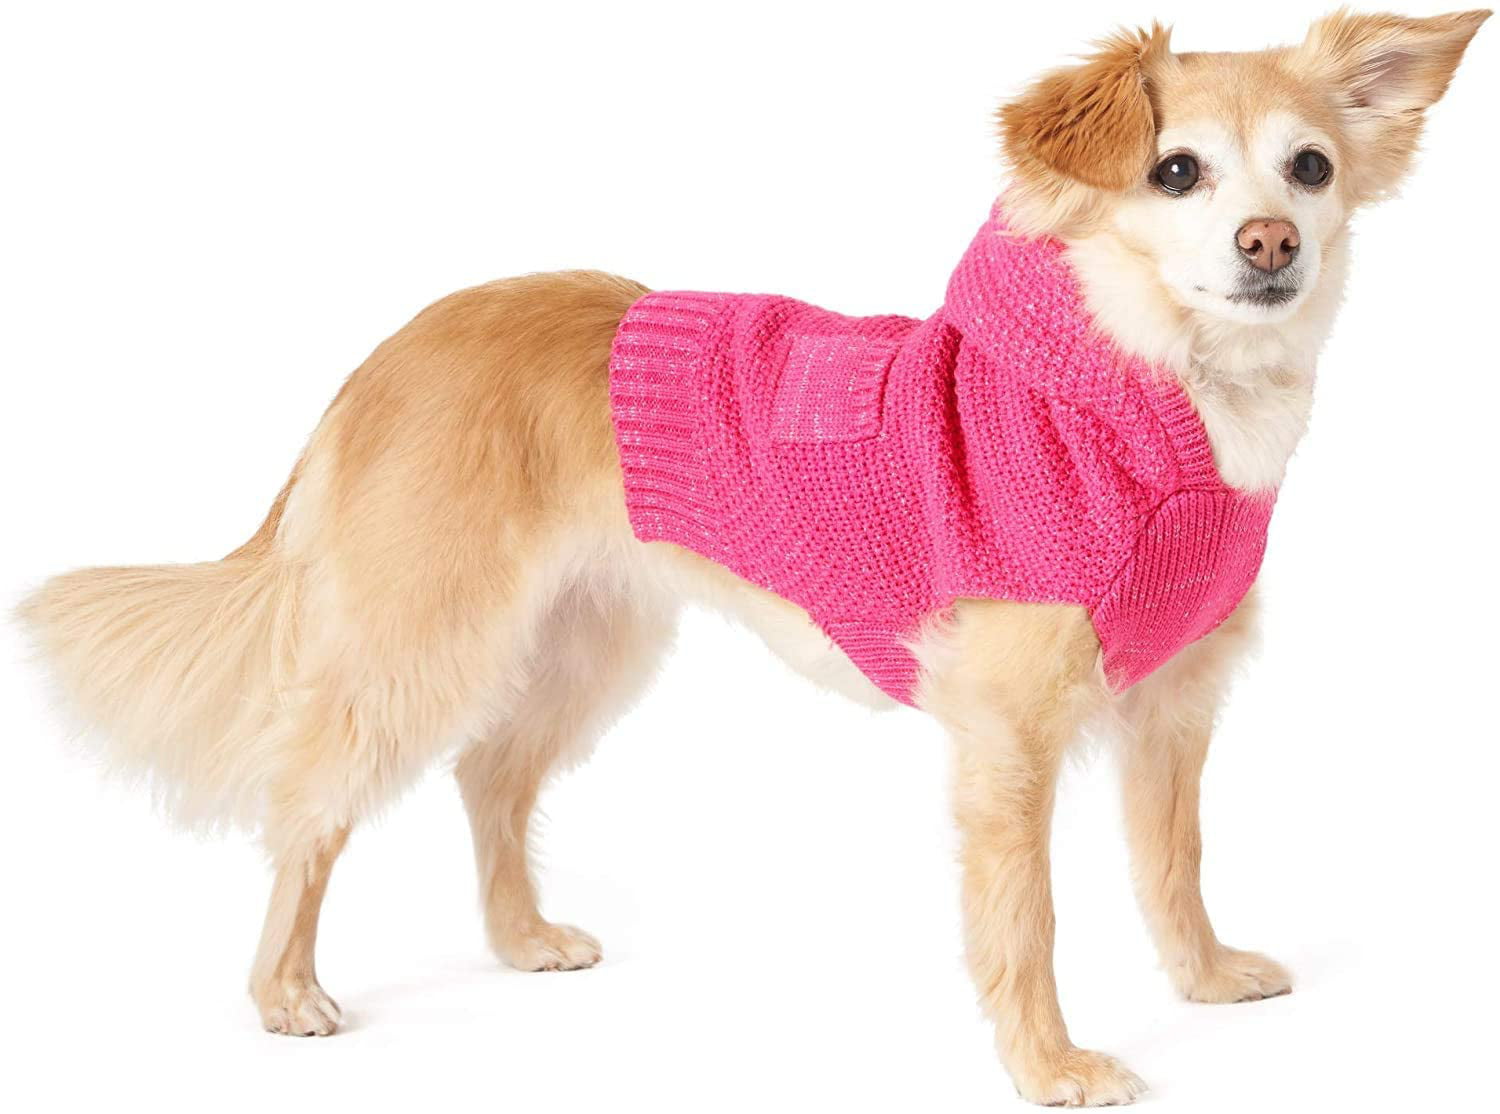 Zunea Dog Winter Coat Snowflake Fleece Lined Warm Jacket Puppy Clothes Thick Cotton Sweatshirt Pet Apparel for Small Dogs Cats This Style Run Small,pls Choose The Size Carefully 